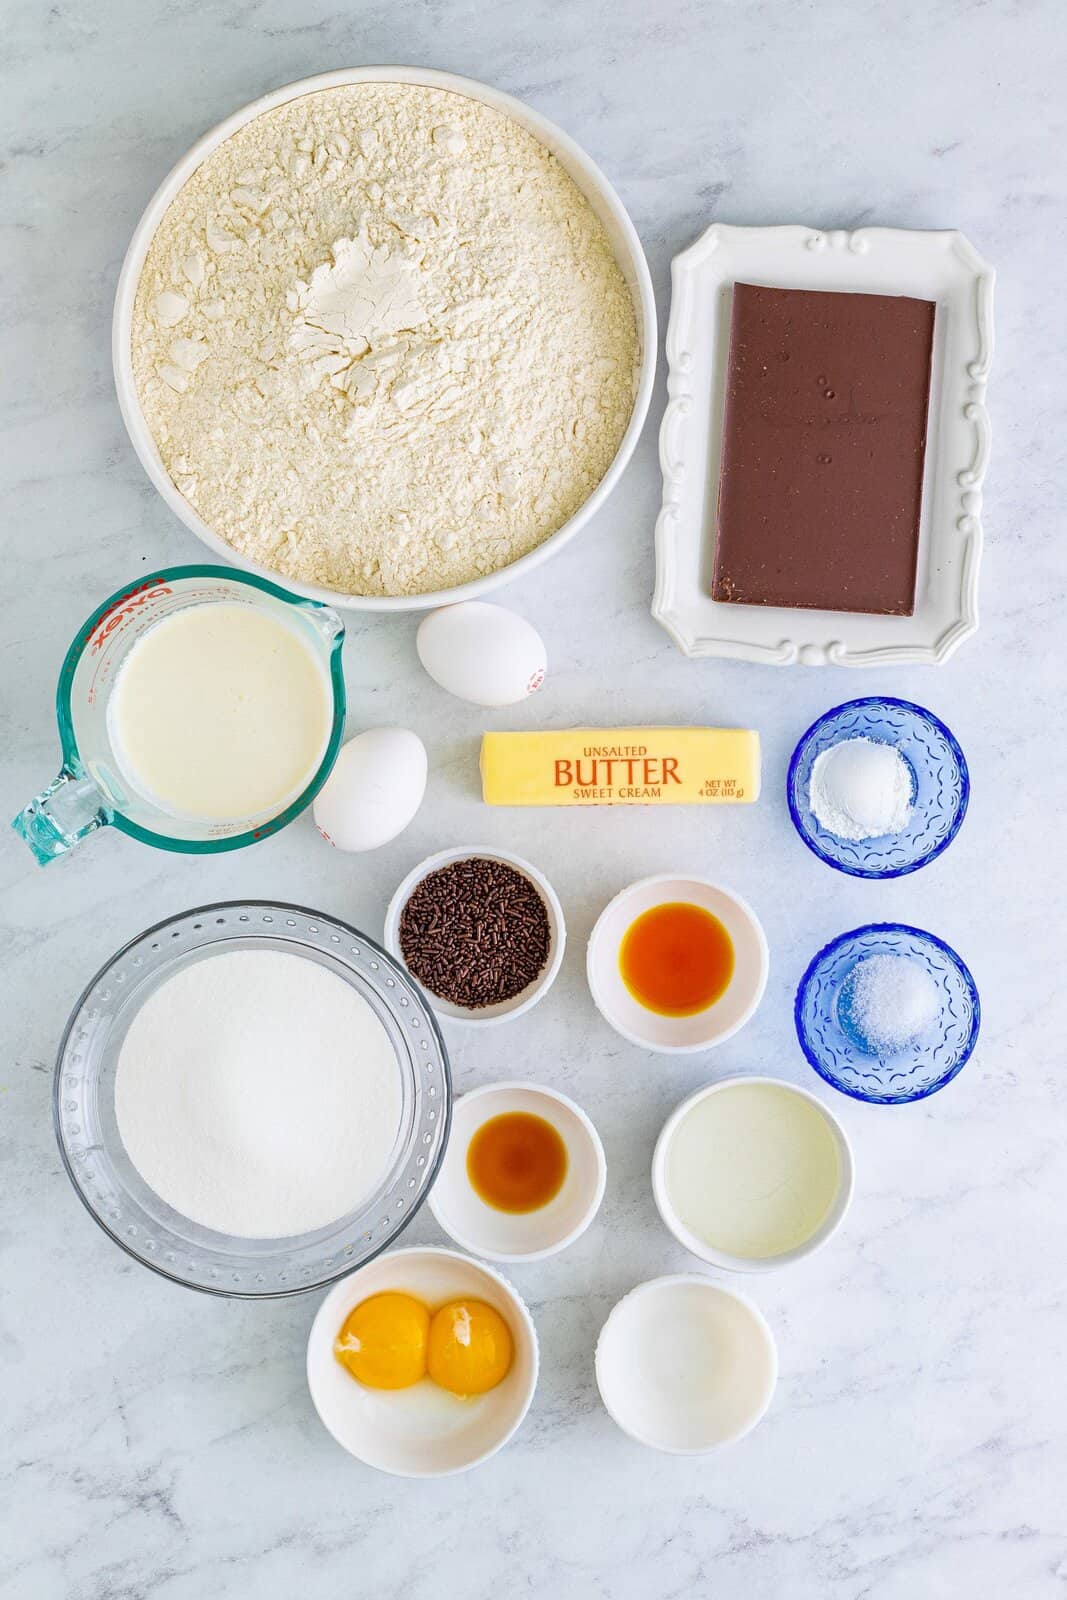 Ingredients needed: all-purpose flour, baking powder, fine sea salt, unsalted butter, granulated sugar, eggs, egg yolks, cake batter extract, almond extract, vanilla extract, semi-sweet chocolate baking bars, heavy cream, light corn syrup and chocolate sprinkles.